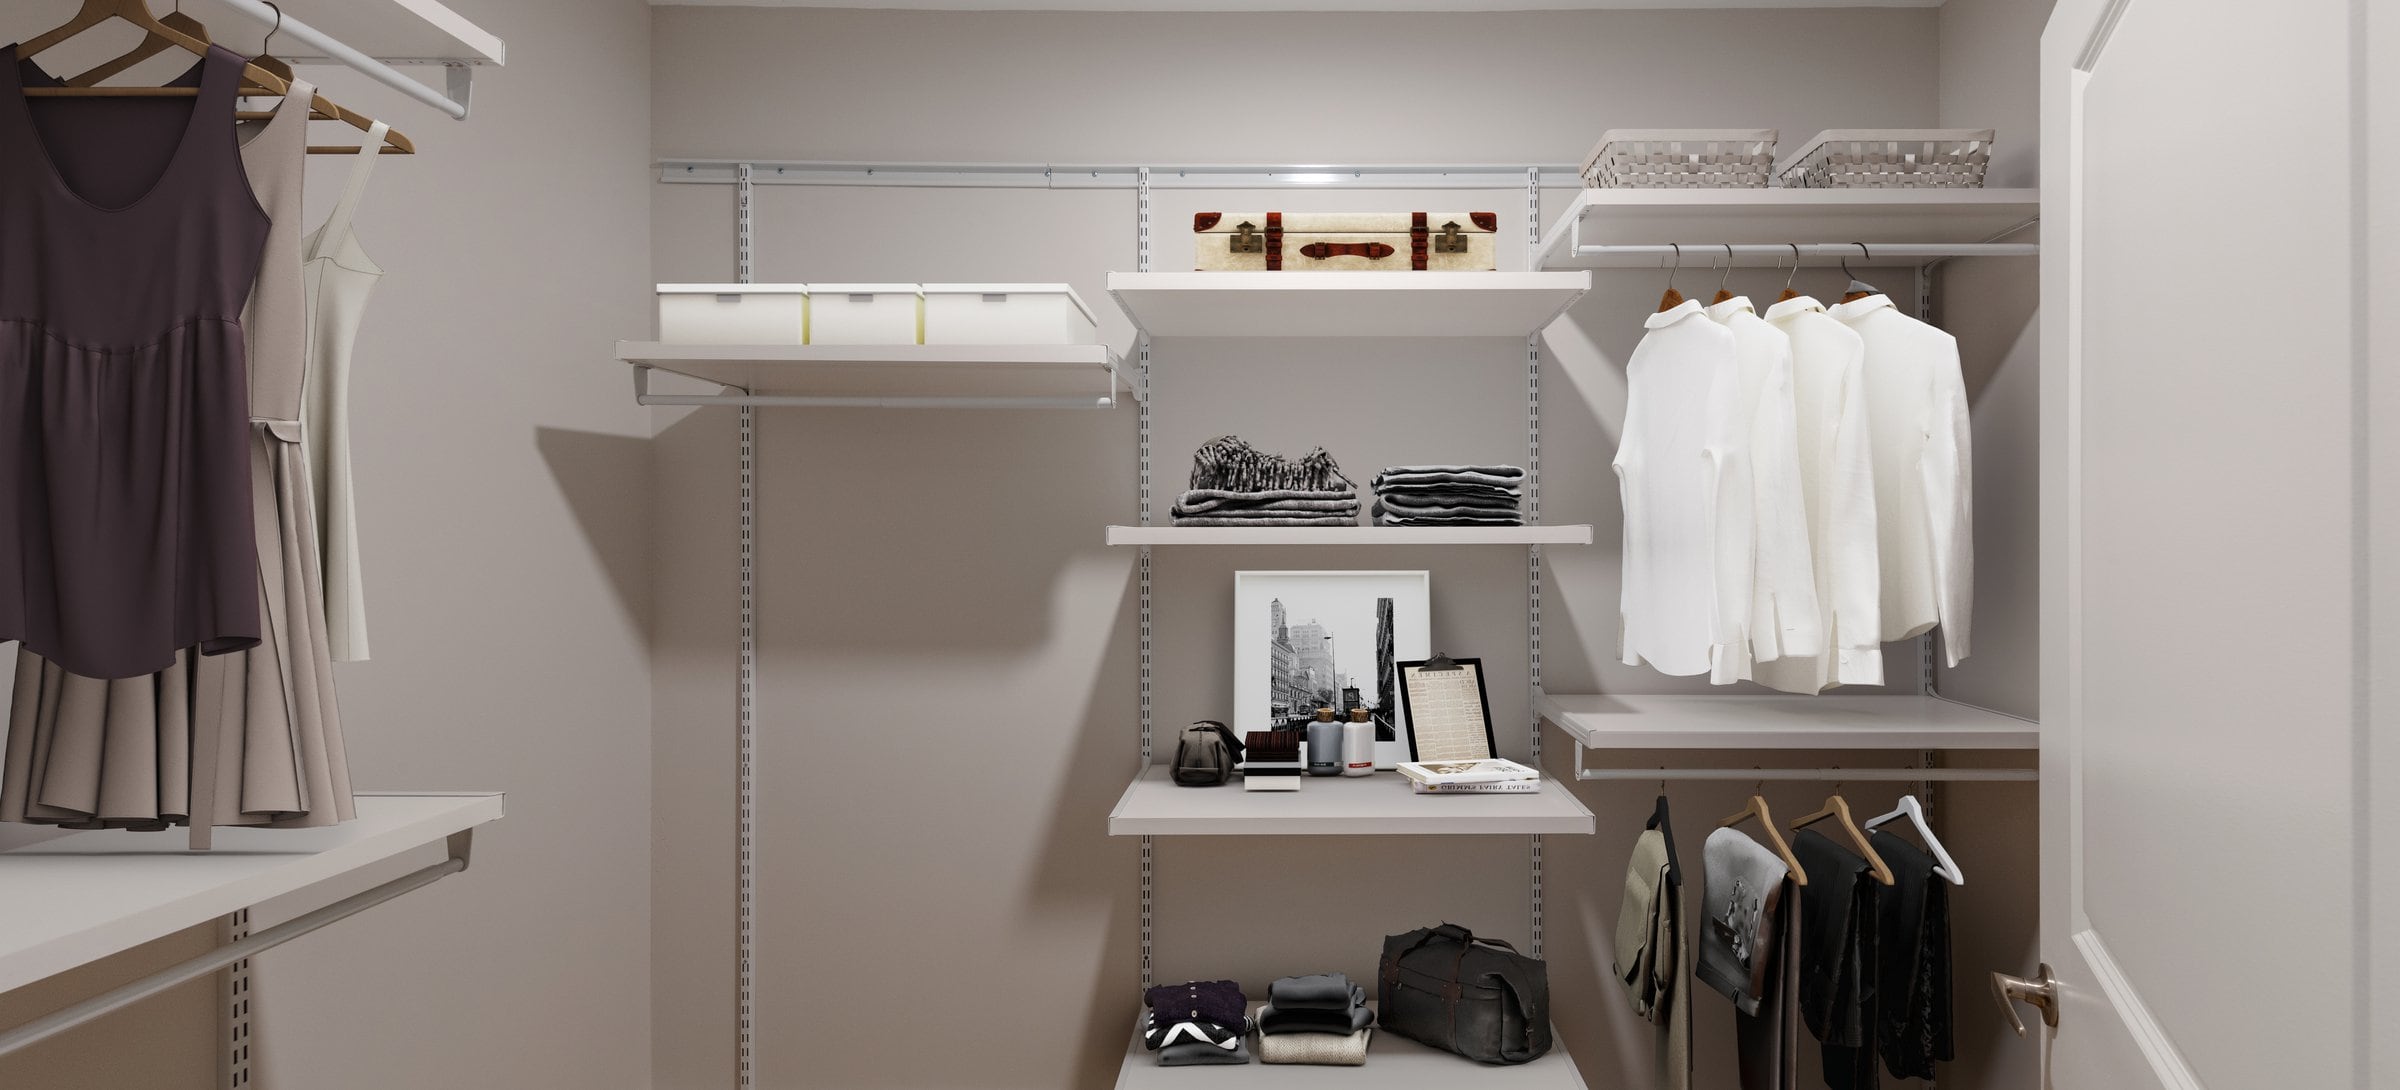 Penthouse-level Signature Collection apartment home walk-in closet with customizable shelf system